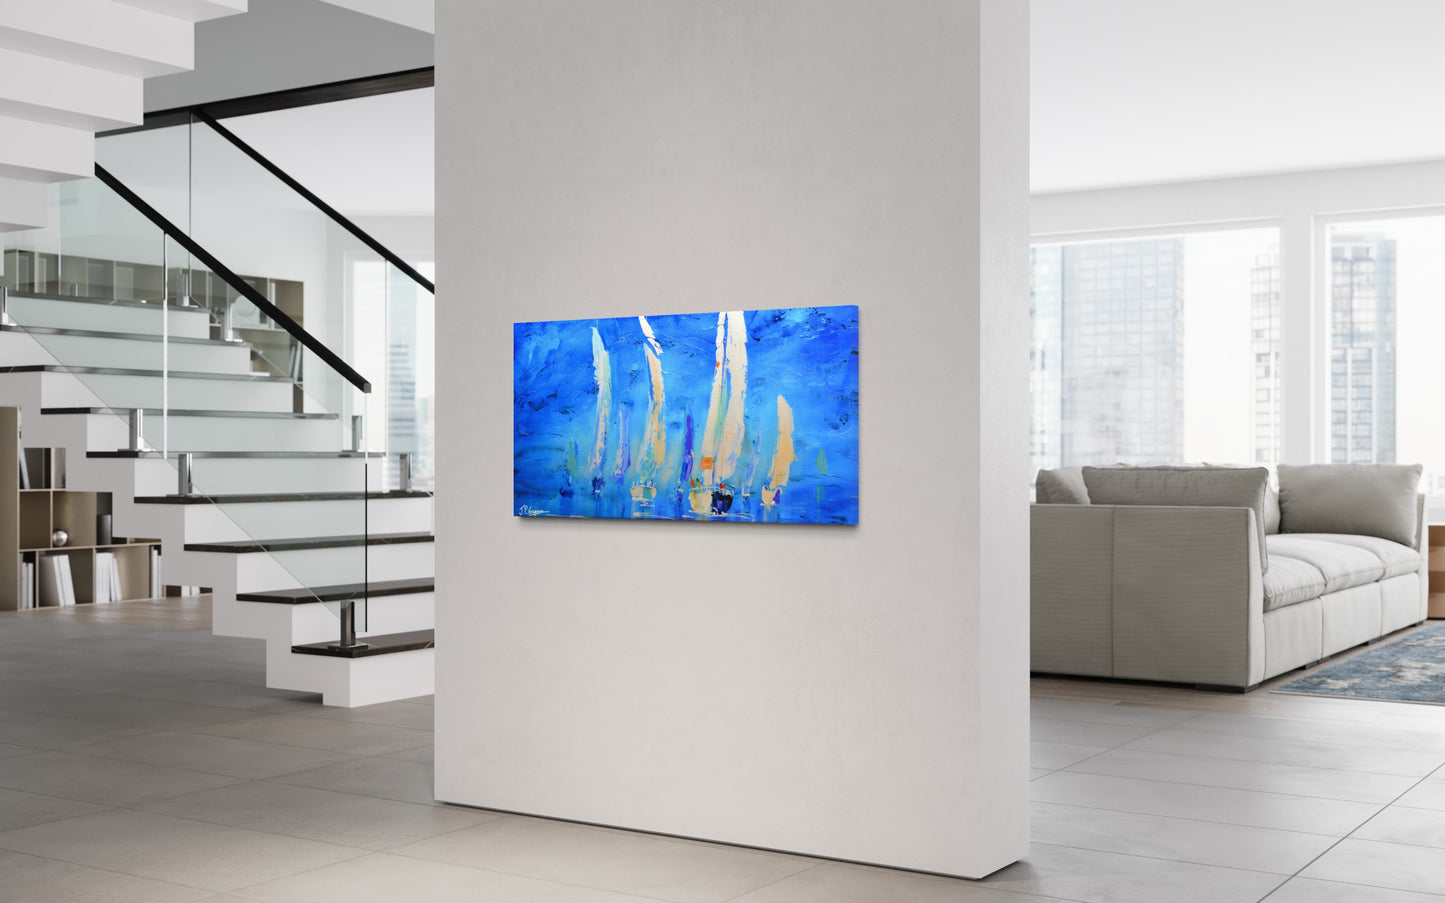 Reproduction on canvas, Sailboats blue background